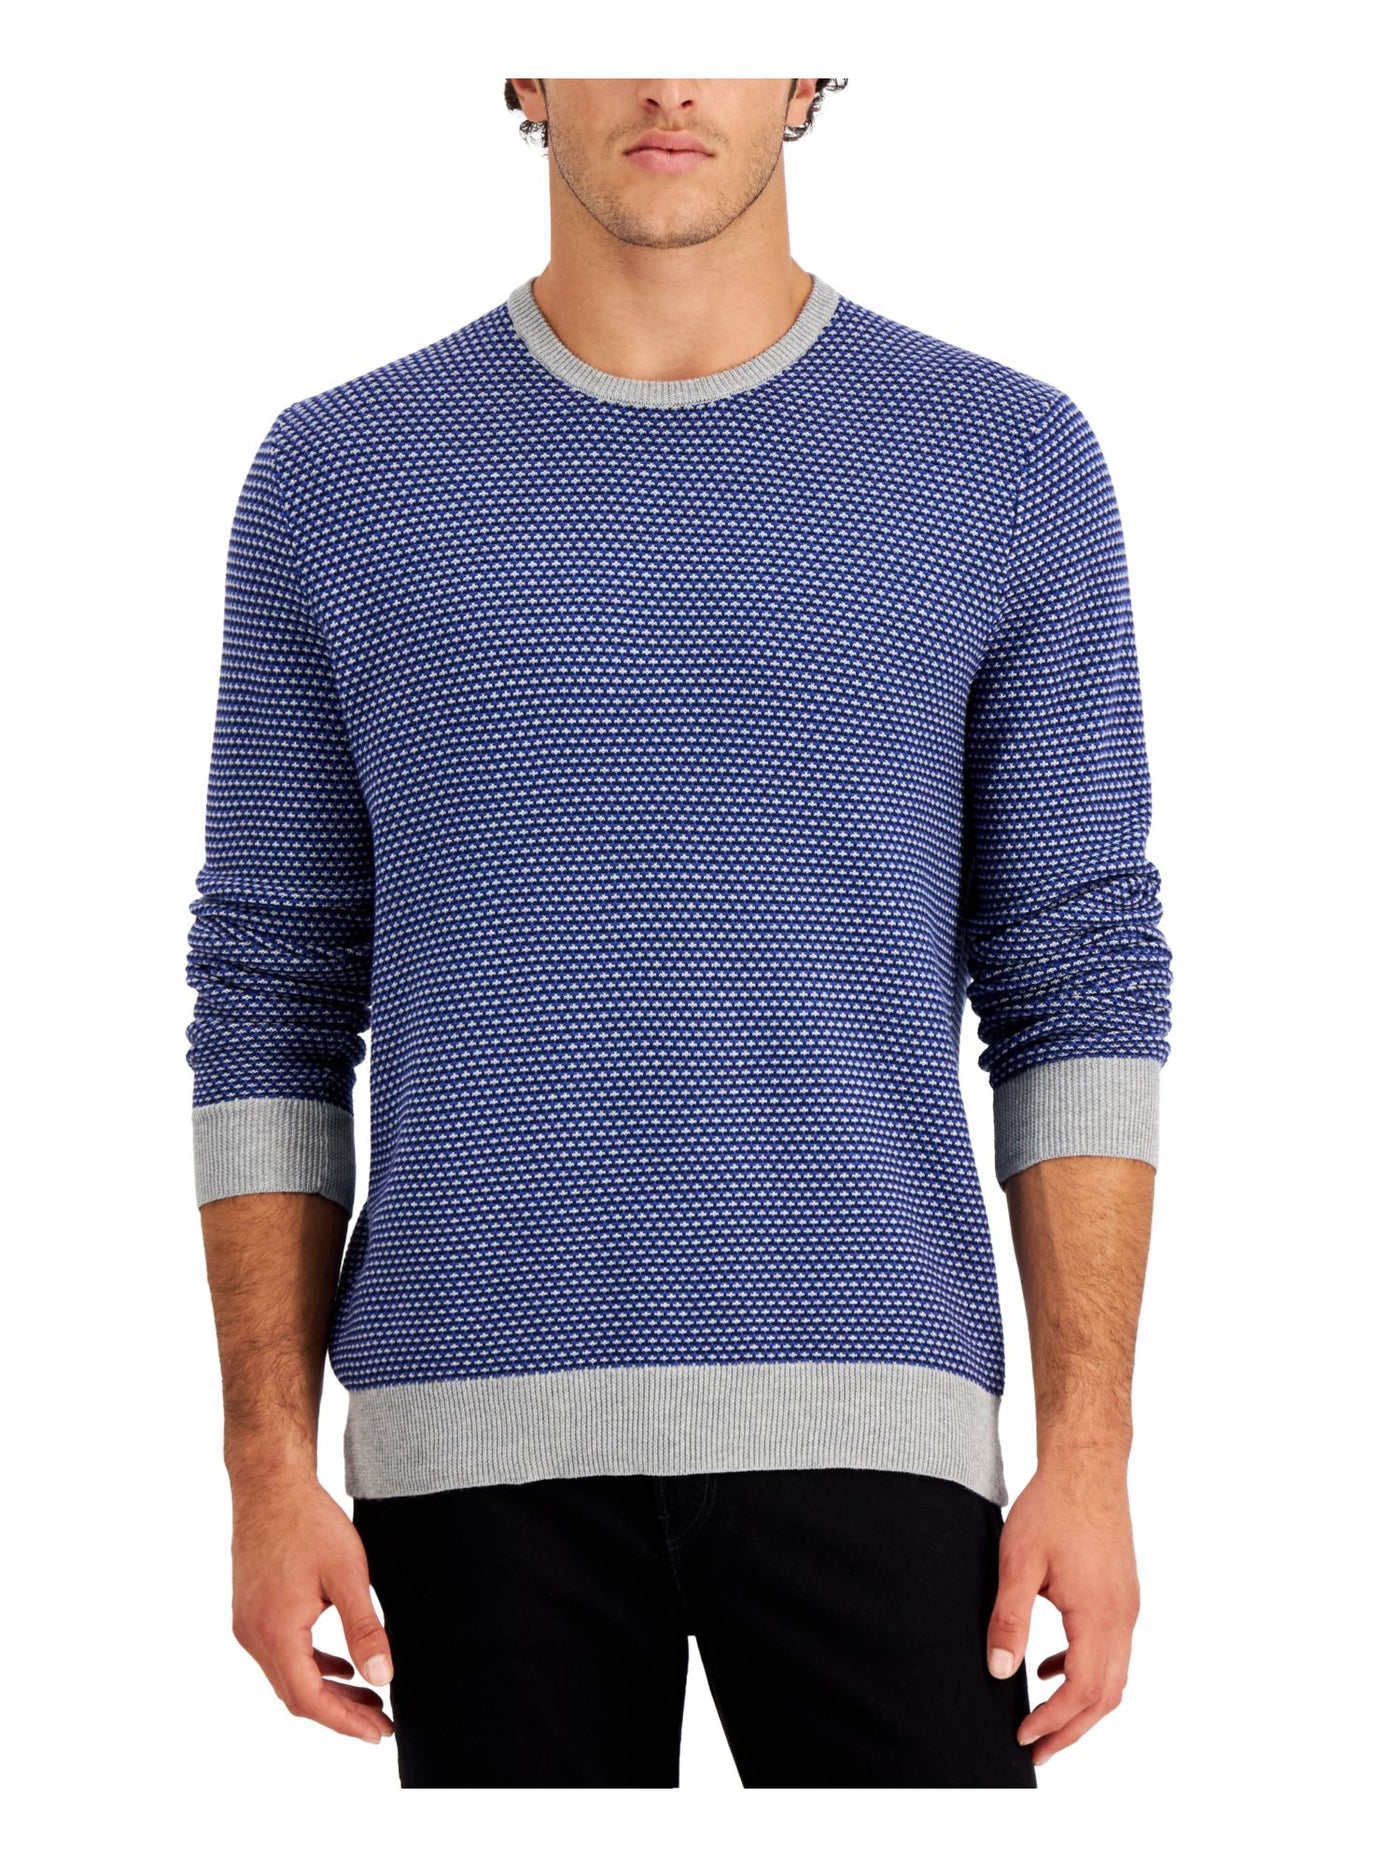 CLUBROOM Mens Elevated Navy Patterned Crew Neck Classic Fit Knit Pullover Sweater XL